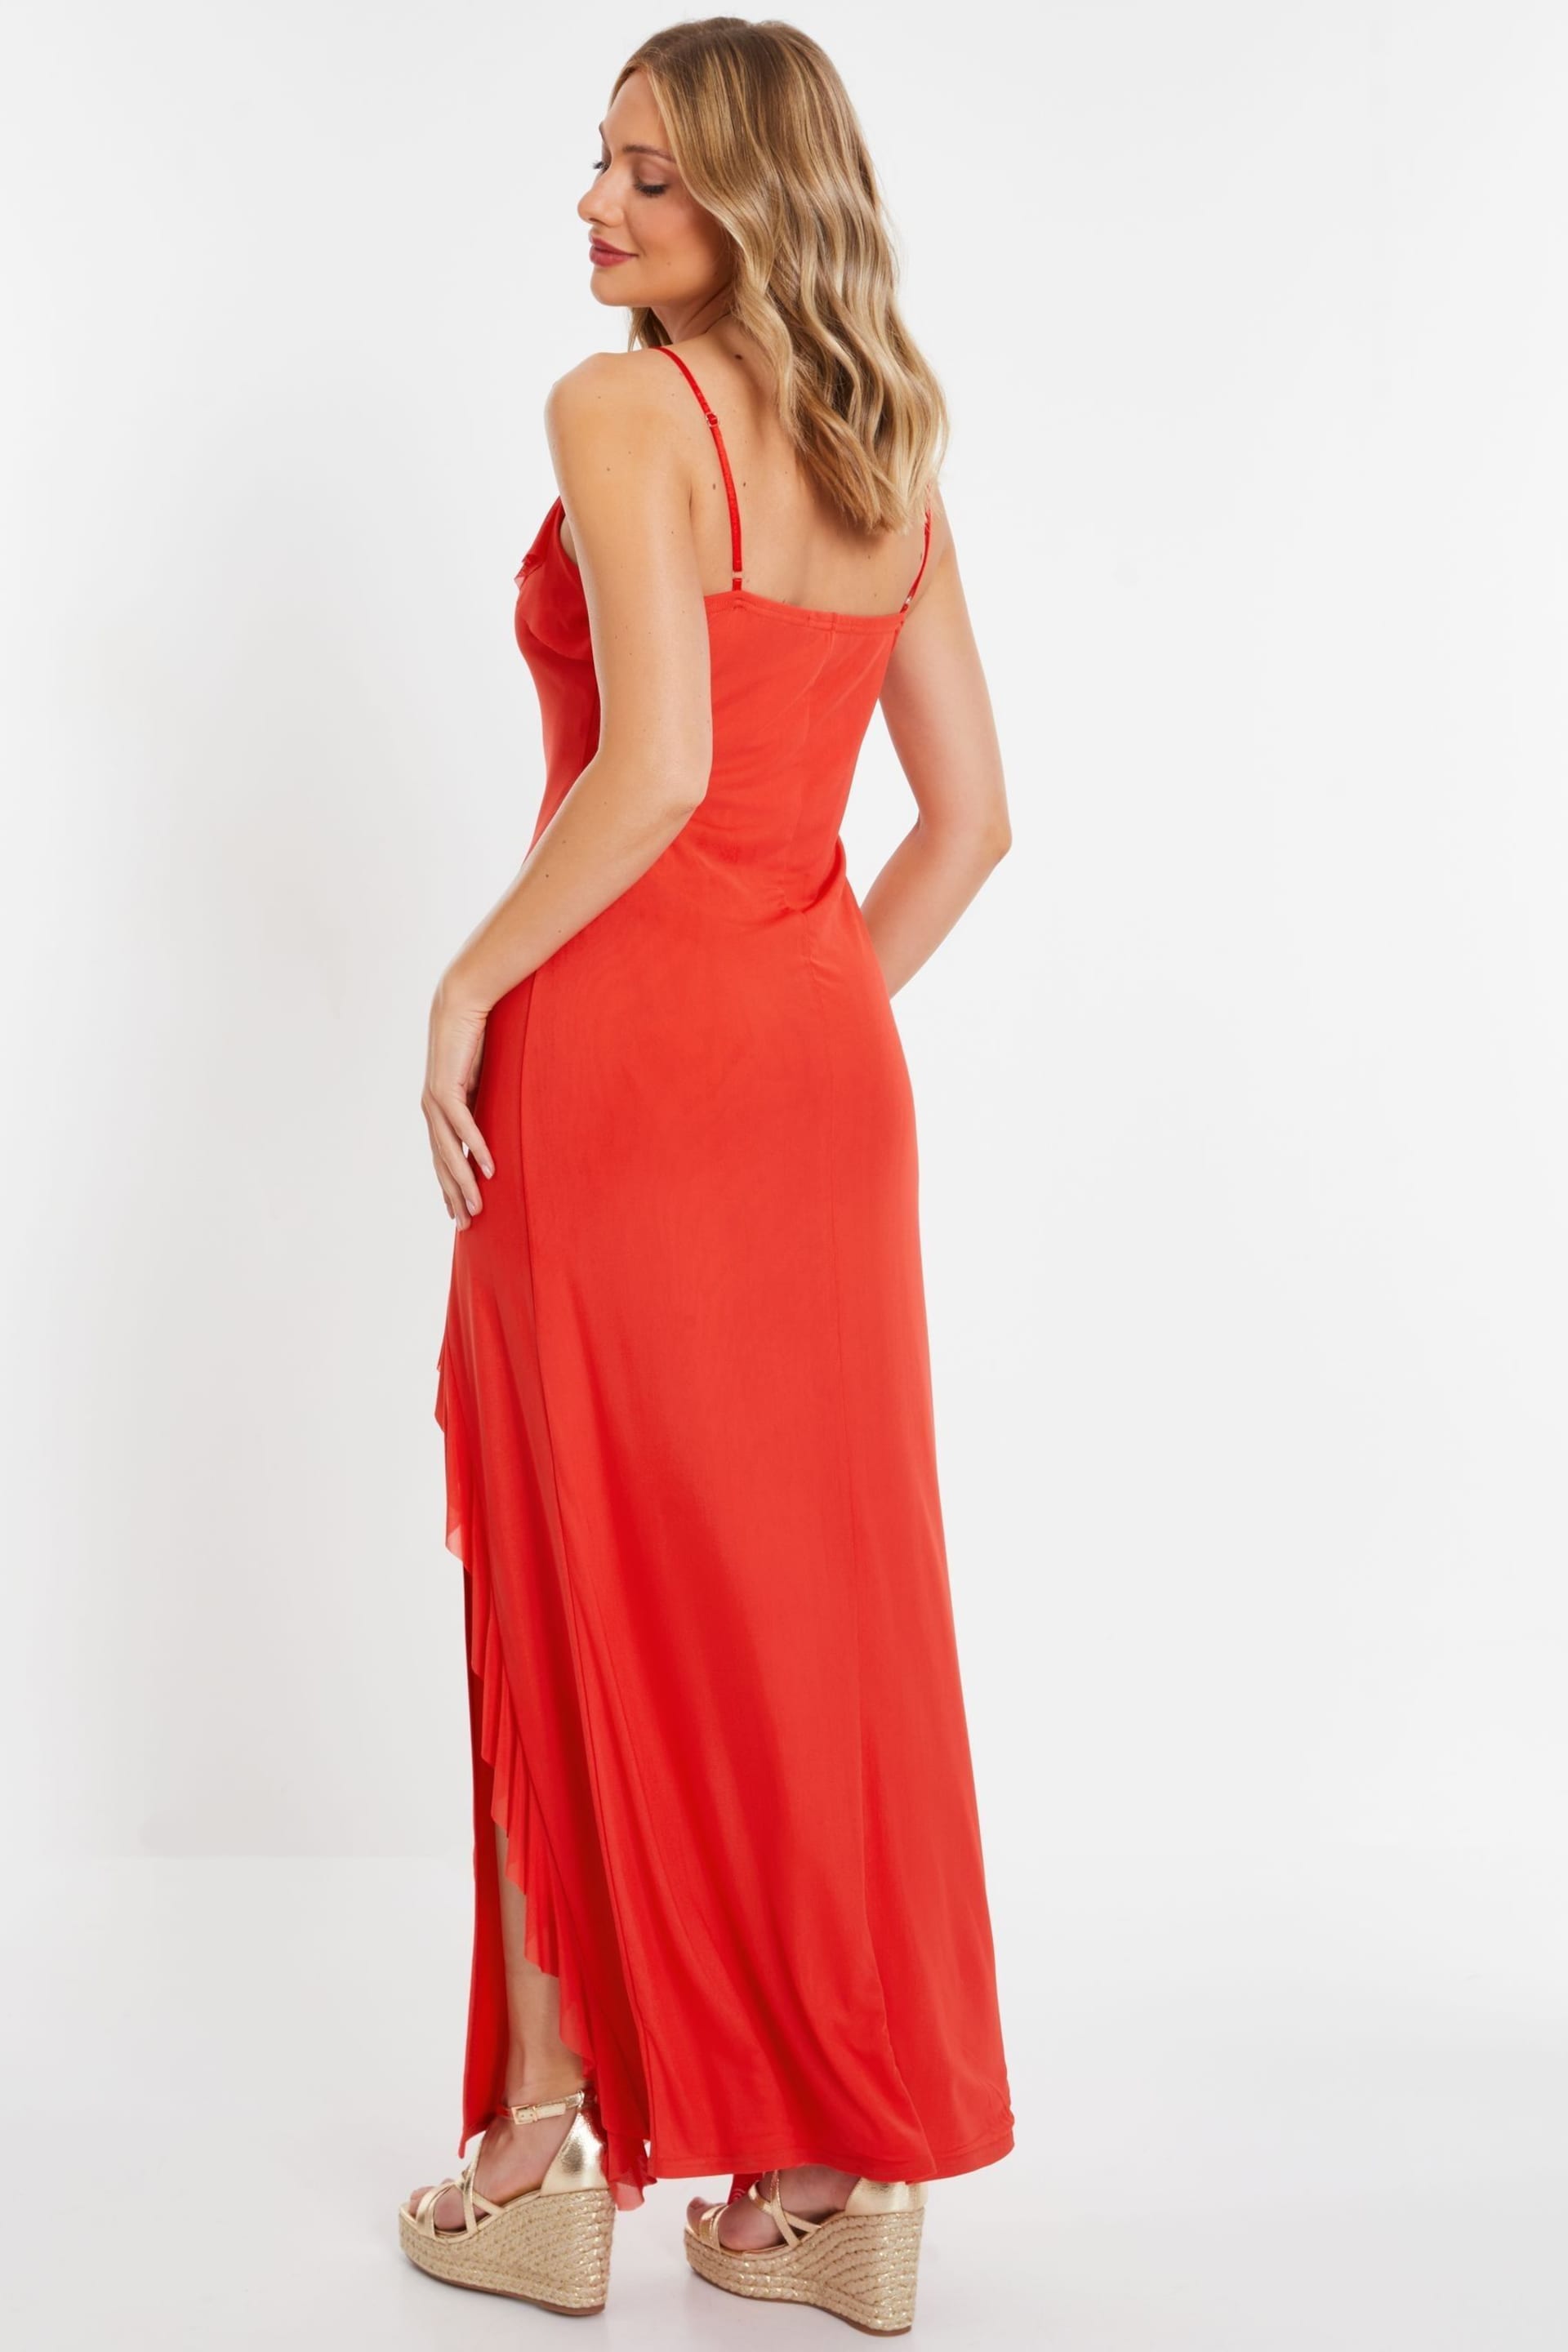 Quiz Red Mesh Strappy Ruffle Maxi Dress - Image 2 of 4